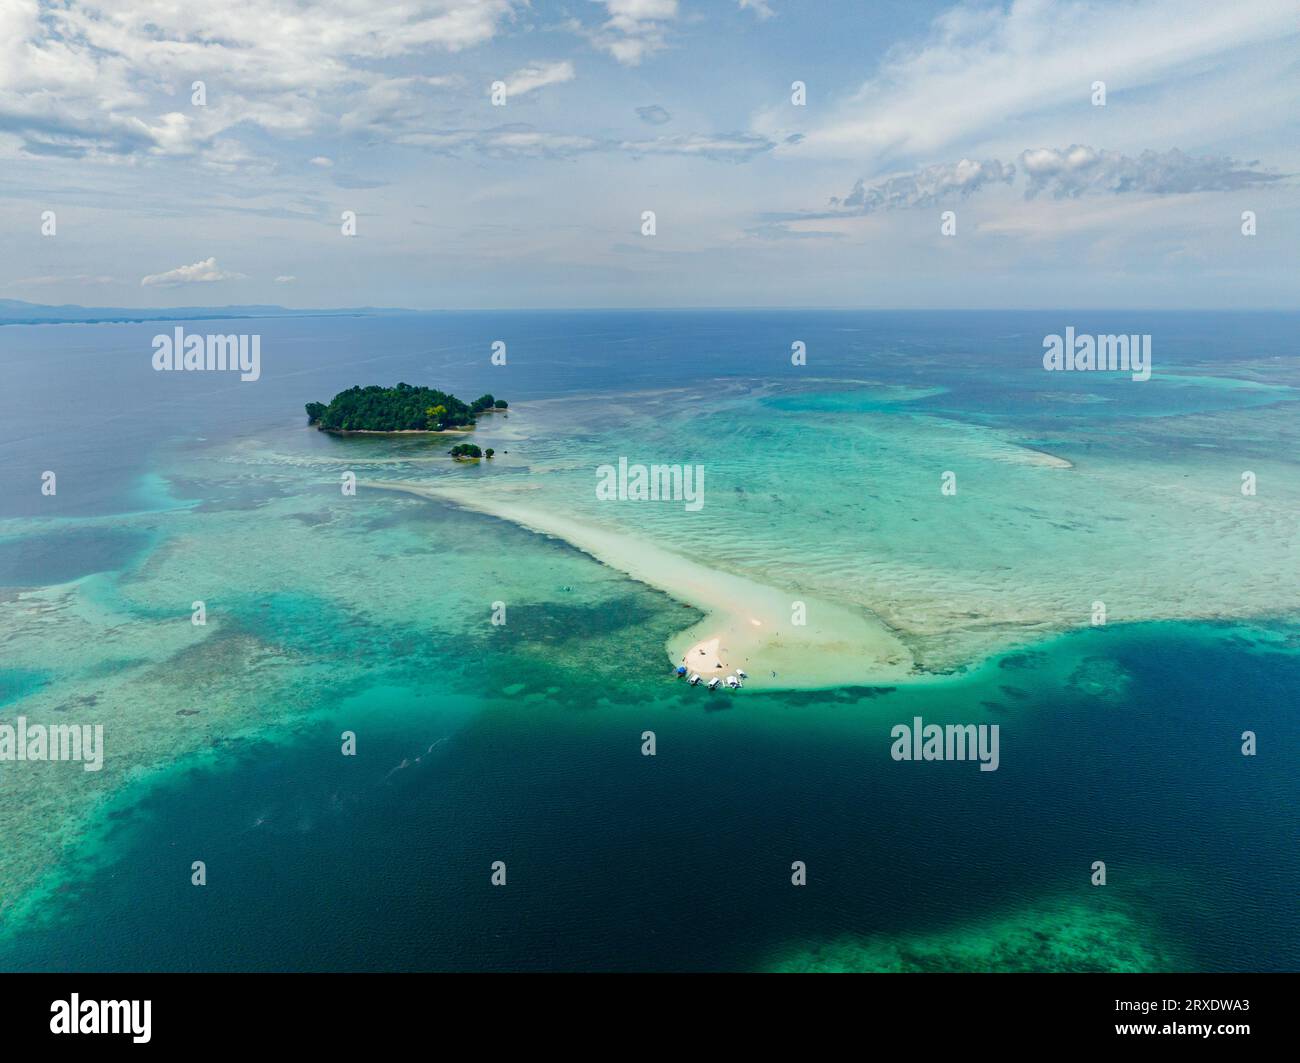 Aerial view of Sandbar and Turtle Island surrounded by azure water and reefs. Barobo, Surigao del Sur. Philippines. Stock Photo